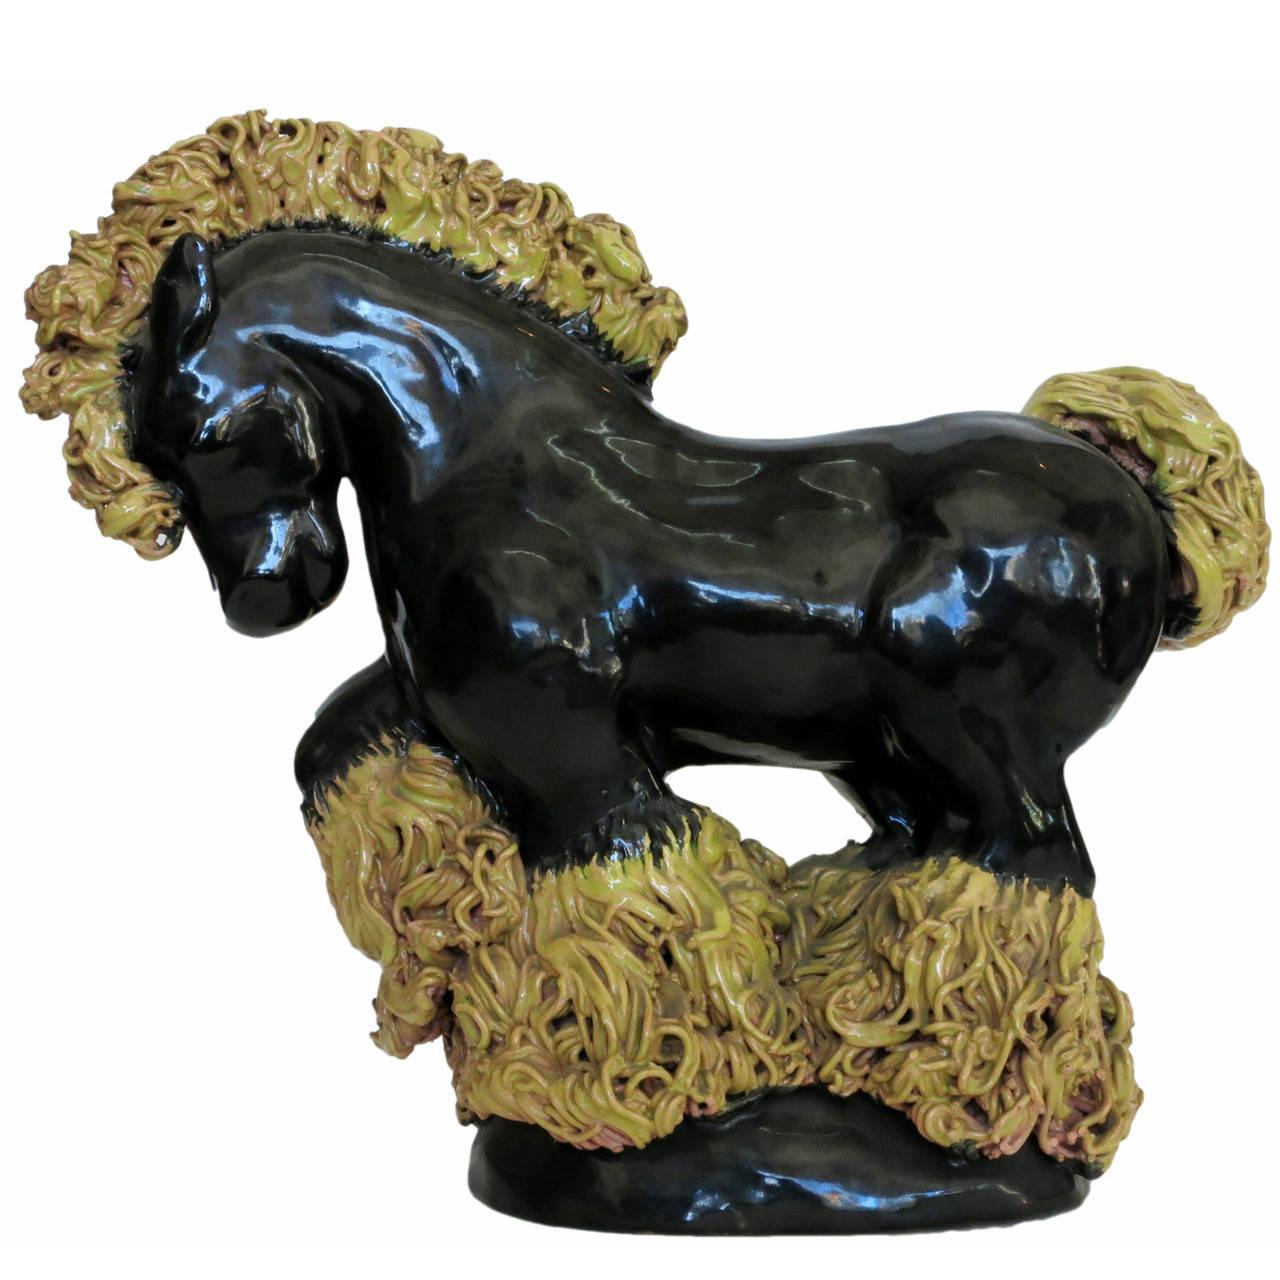 clydesdale horse figurine